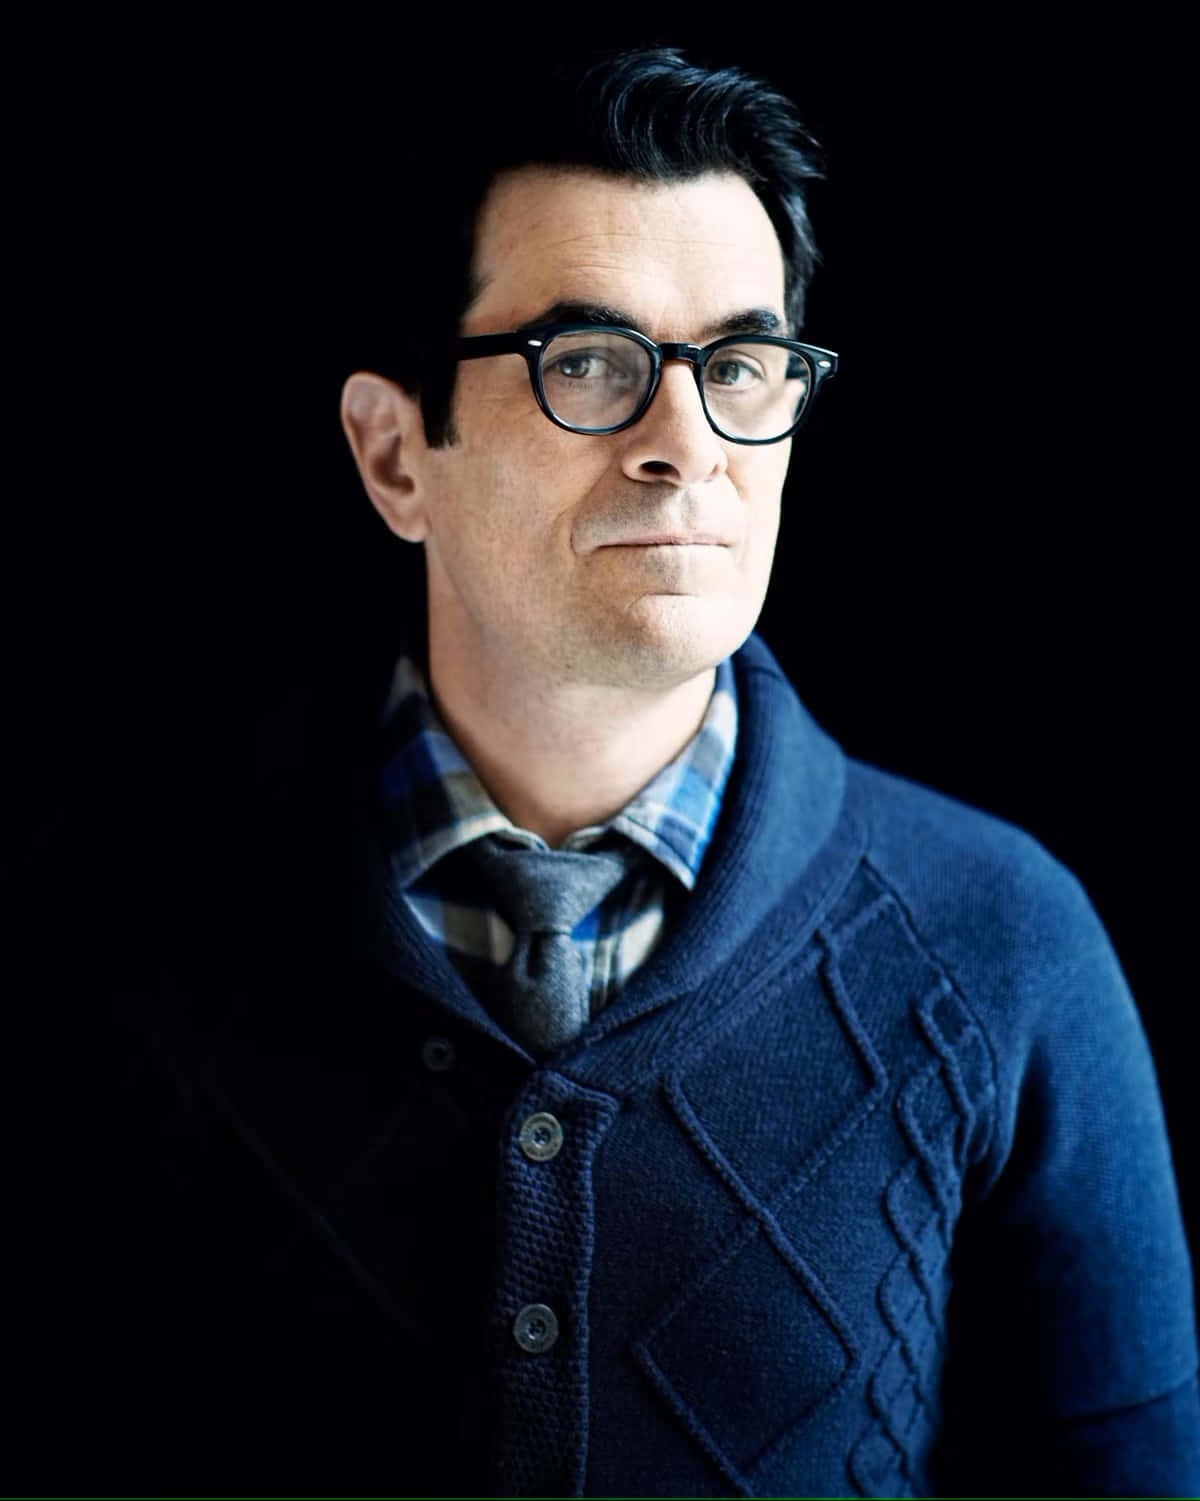 Award-winning actor Ty Burrell smiling at a red carpet event Wallpaper